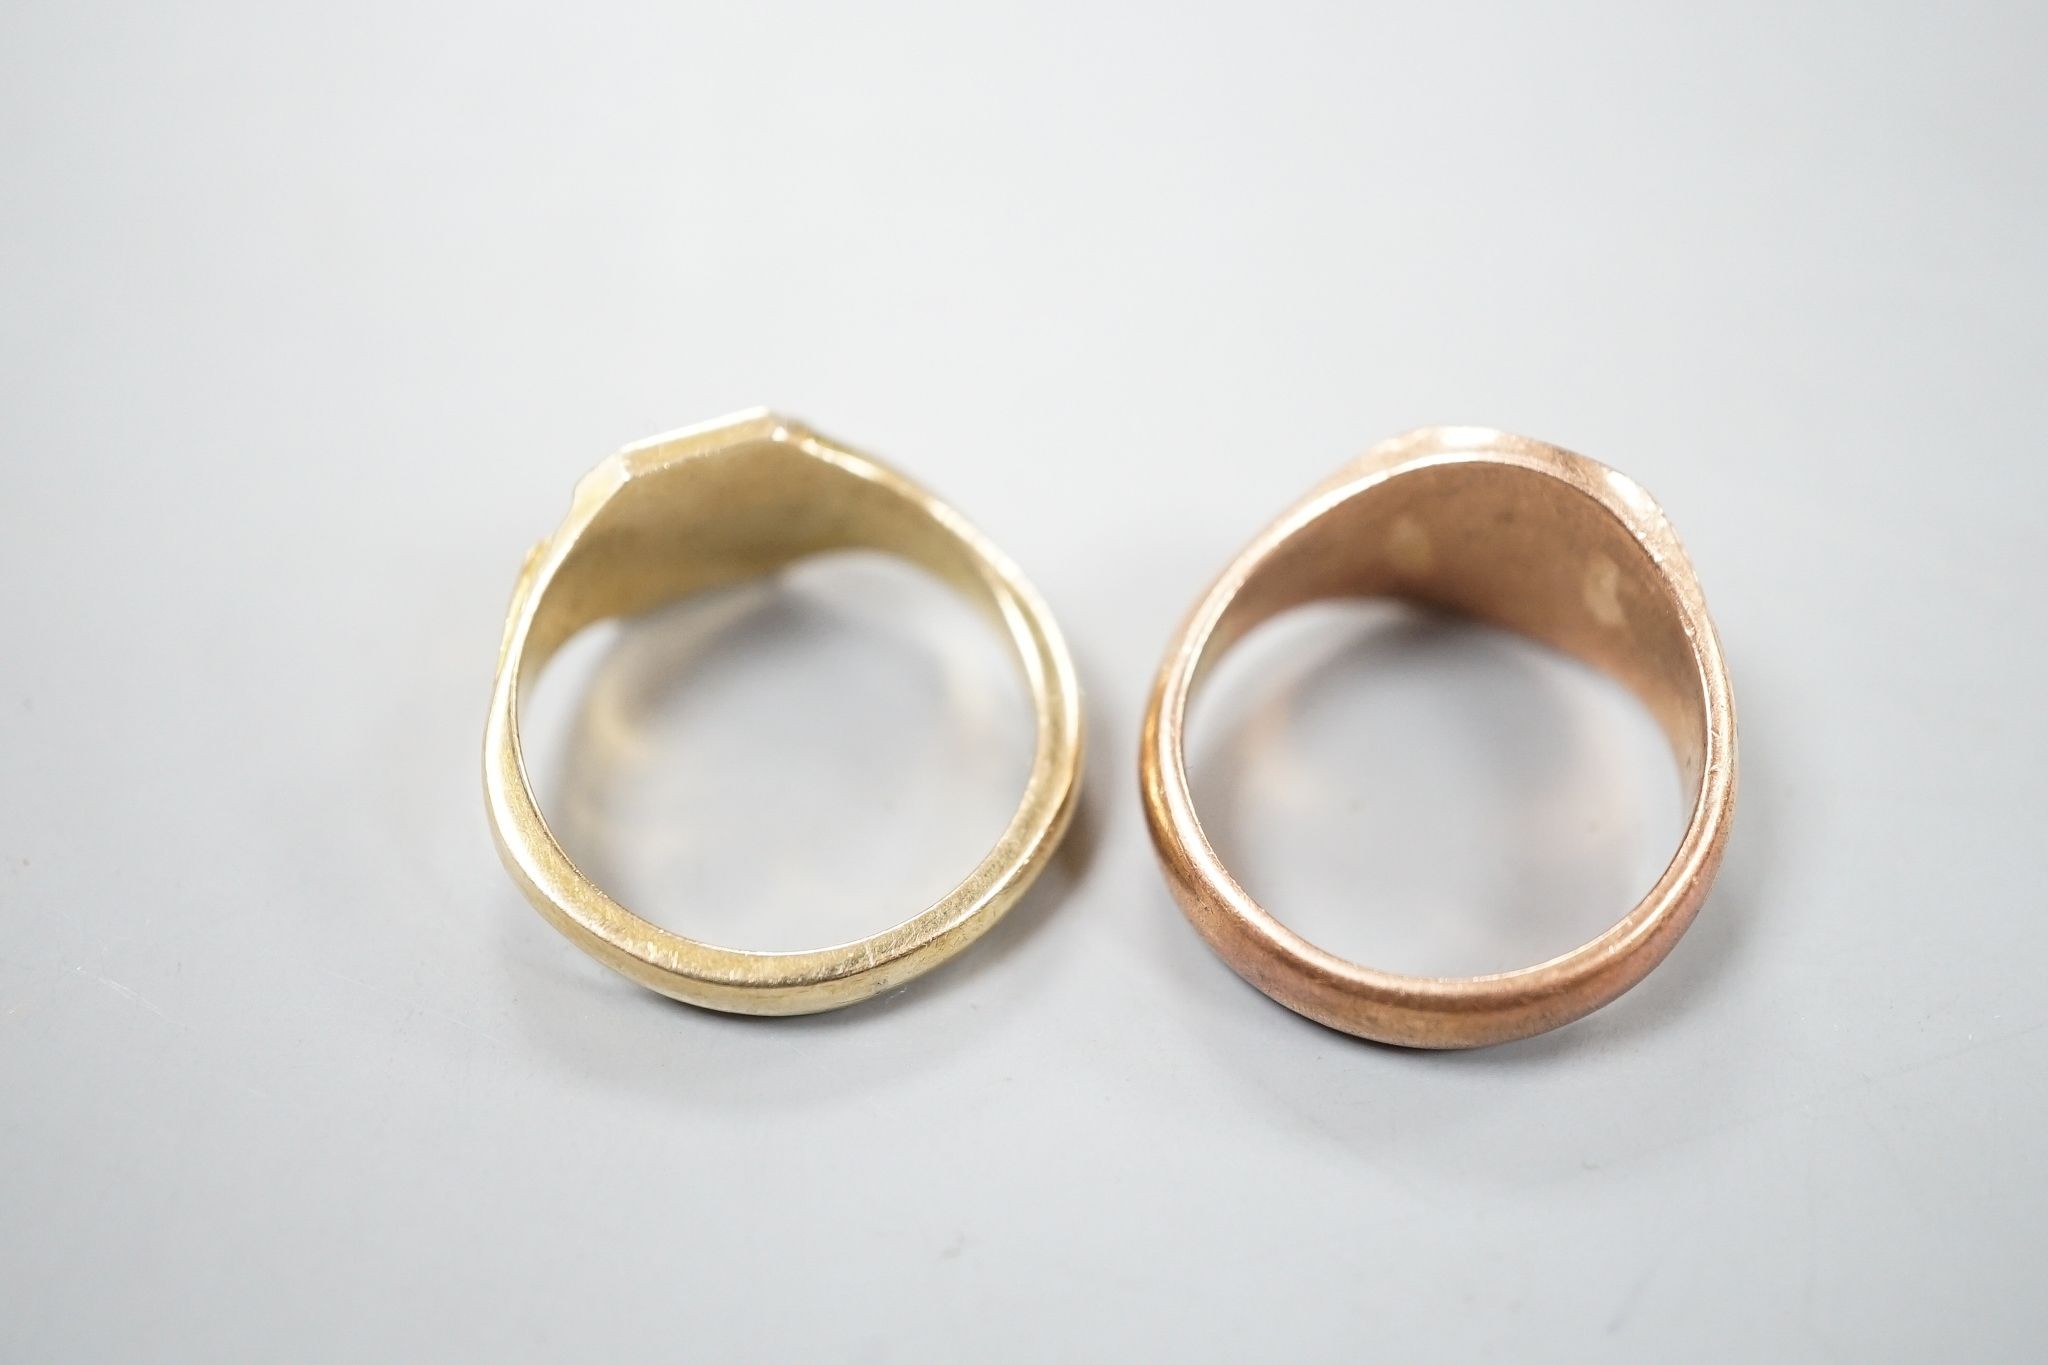 Two 9ct gold signet rings, both with engraved monograms, sizes R/S & S, gross 14.7 grams. - Image 9 of 9